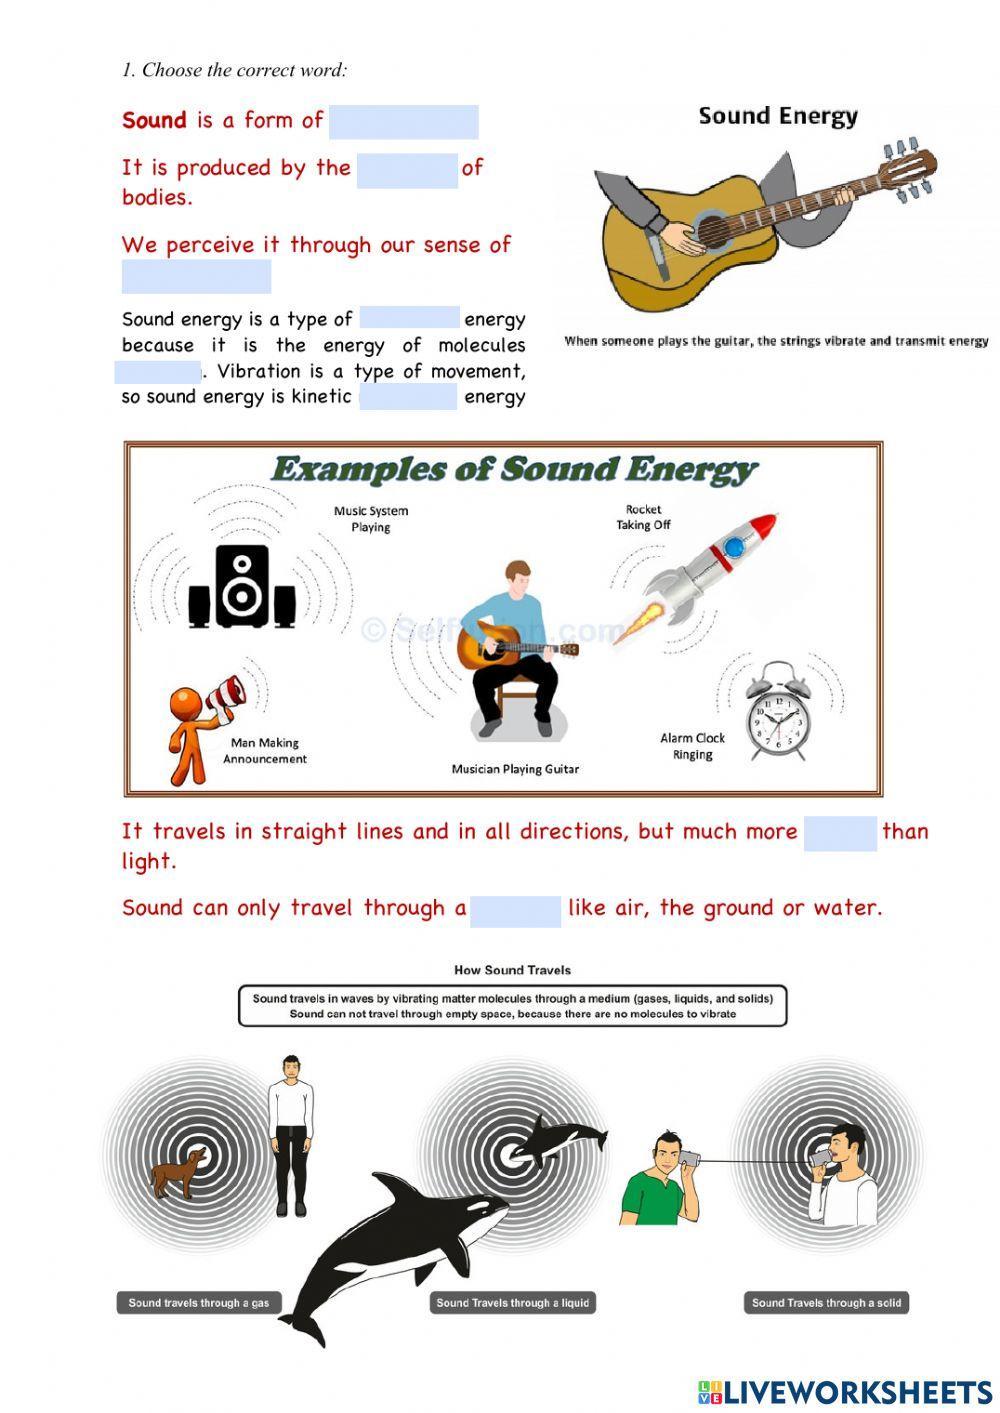 About Sound Energy